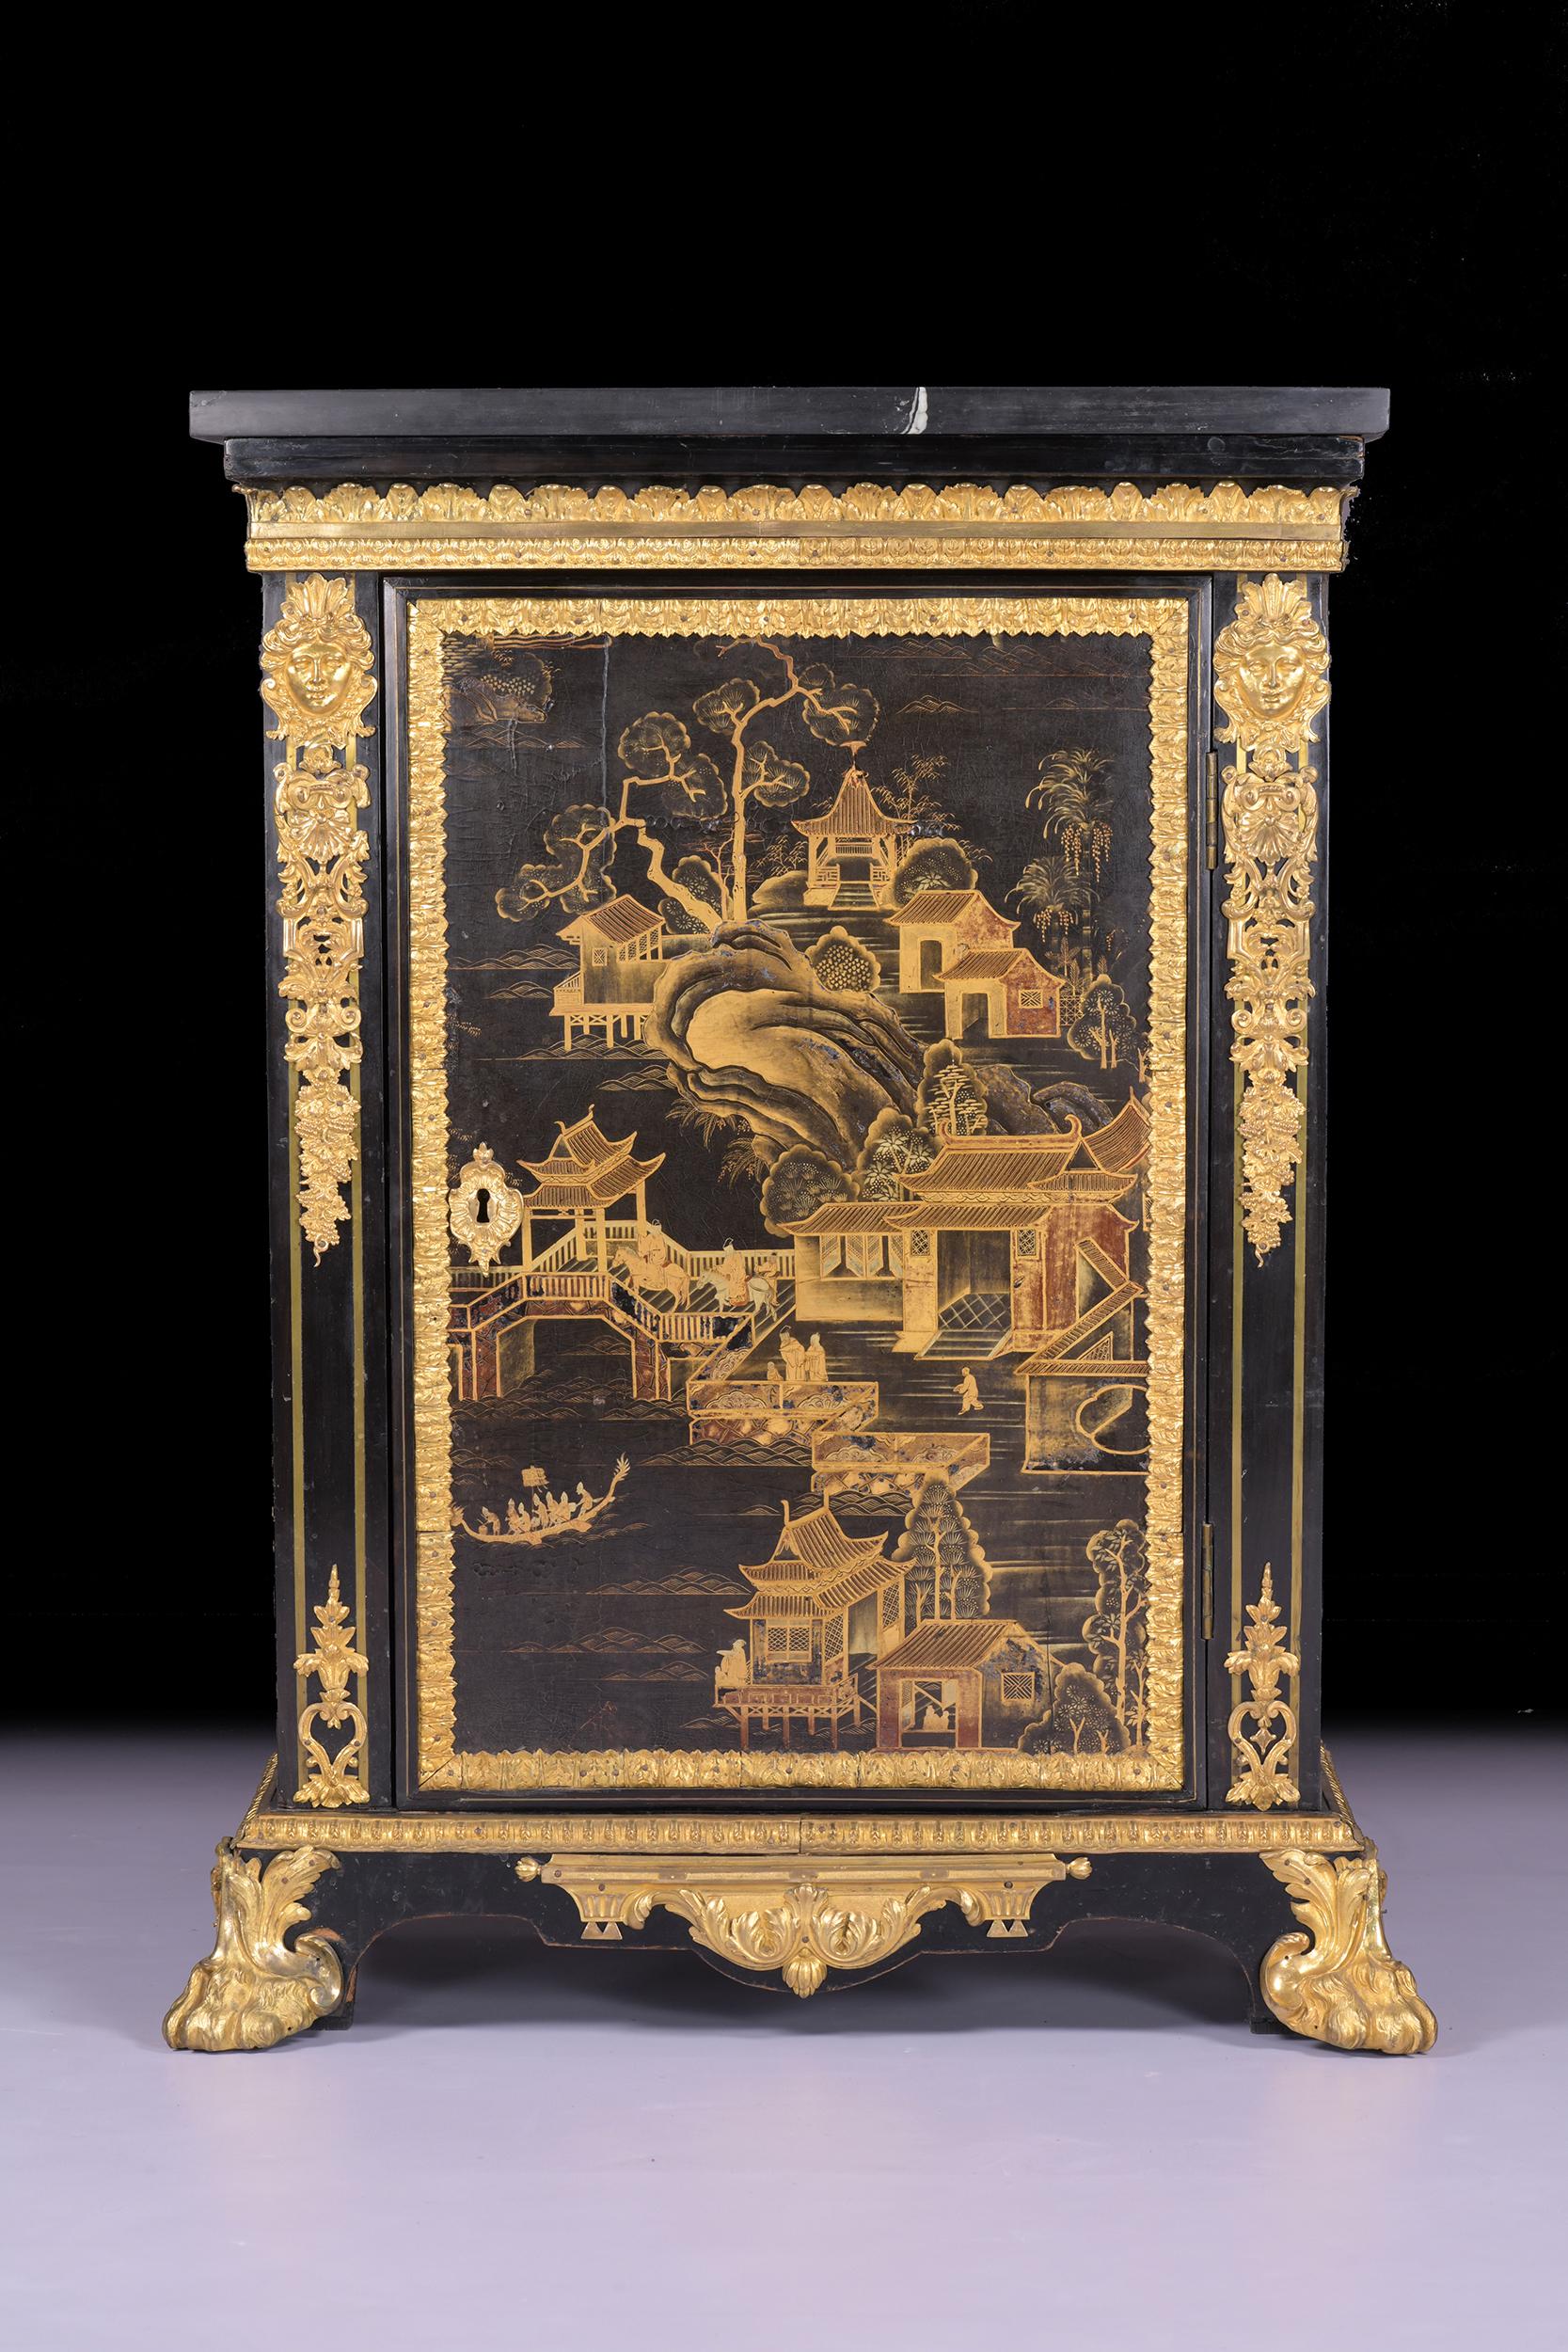 A very fine French ormolu-mounted chinoserie black and gold lacquer pewter-inlaid ebony side cabinet of very neat proportions, with a rectangular black marble top above a decorated ormolu frieze, above a chinoserie lacquered panel decorated with a